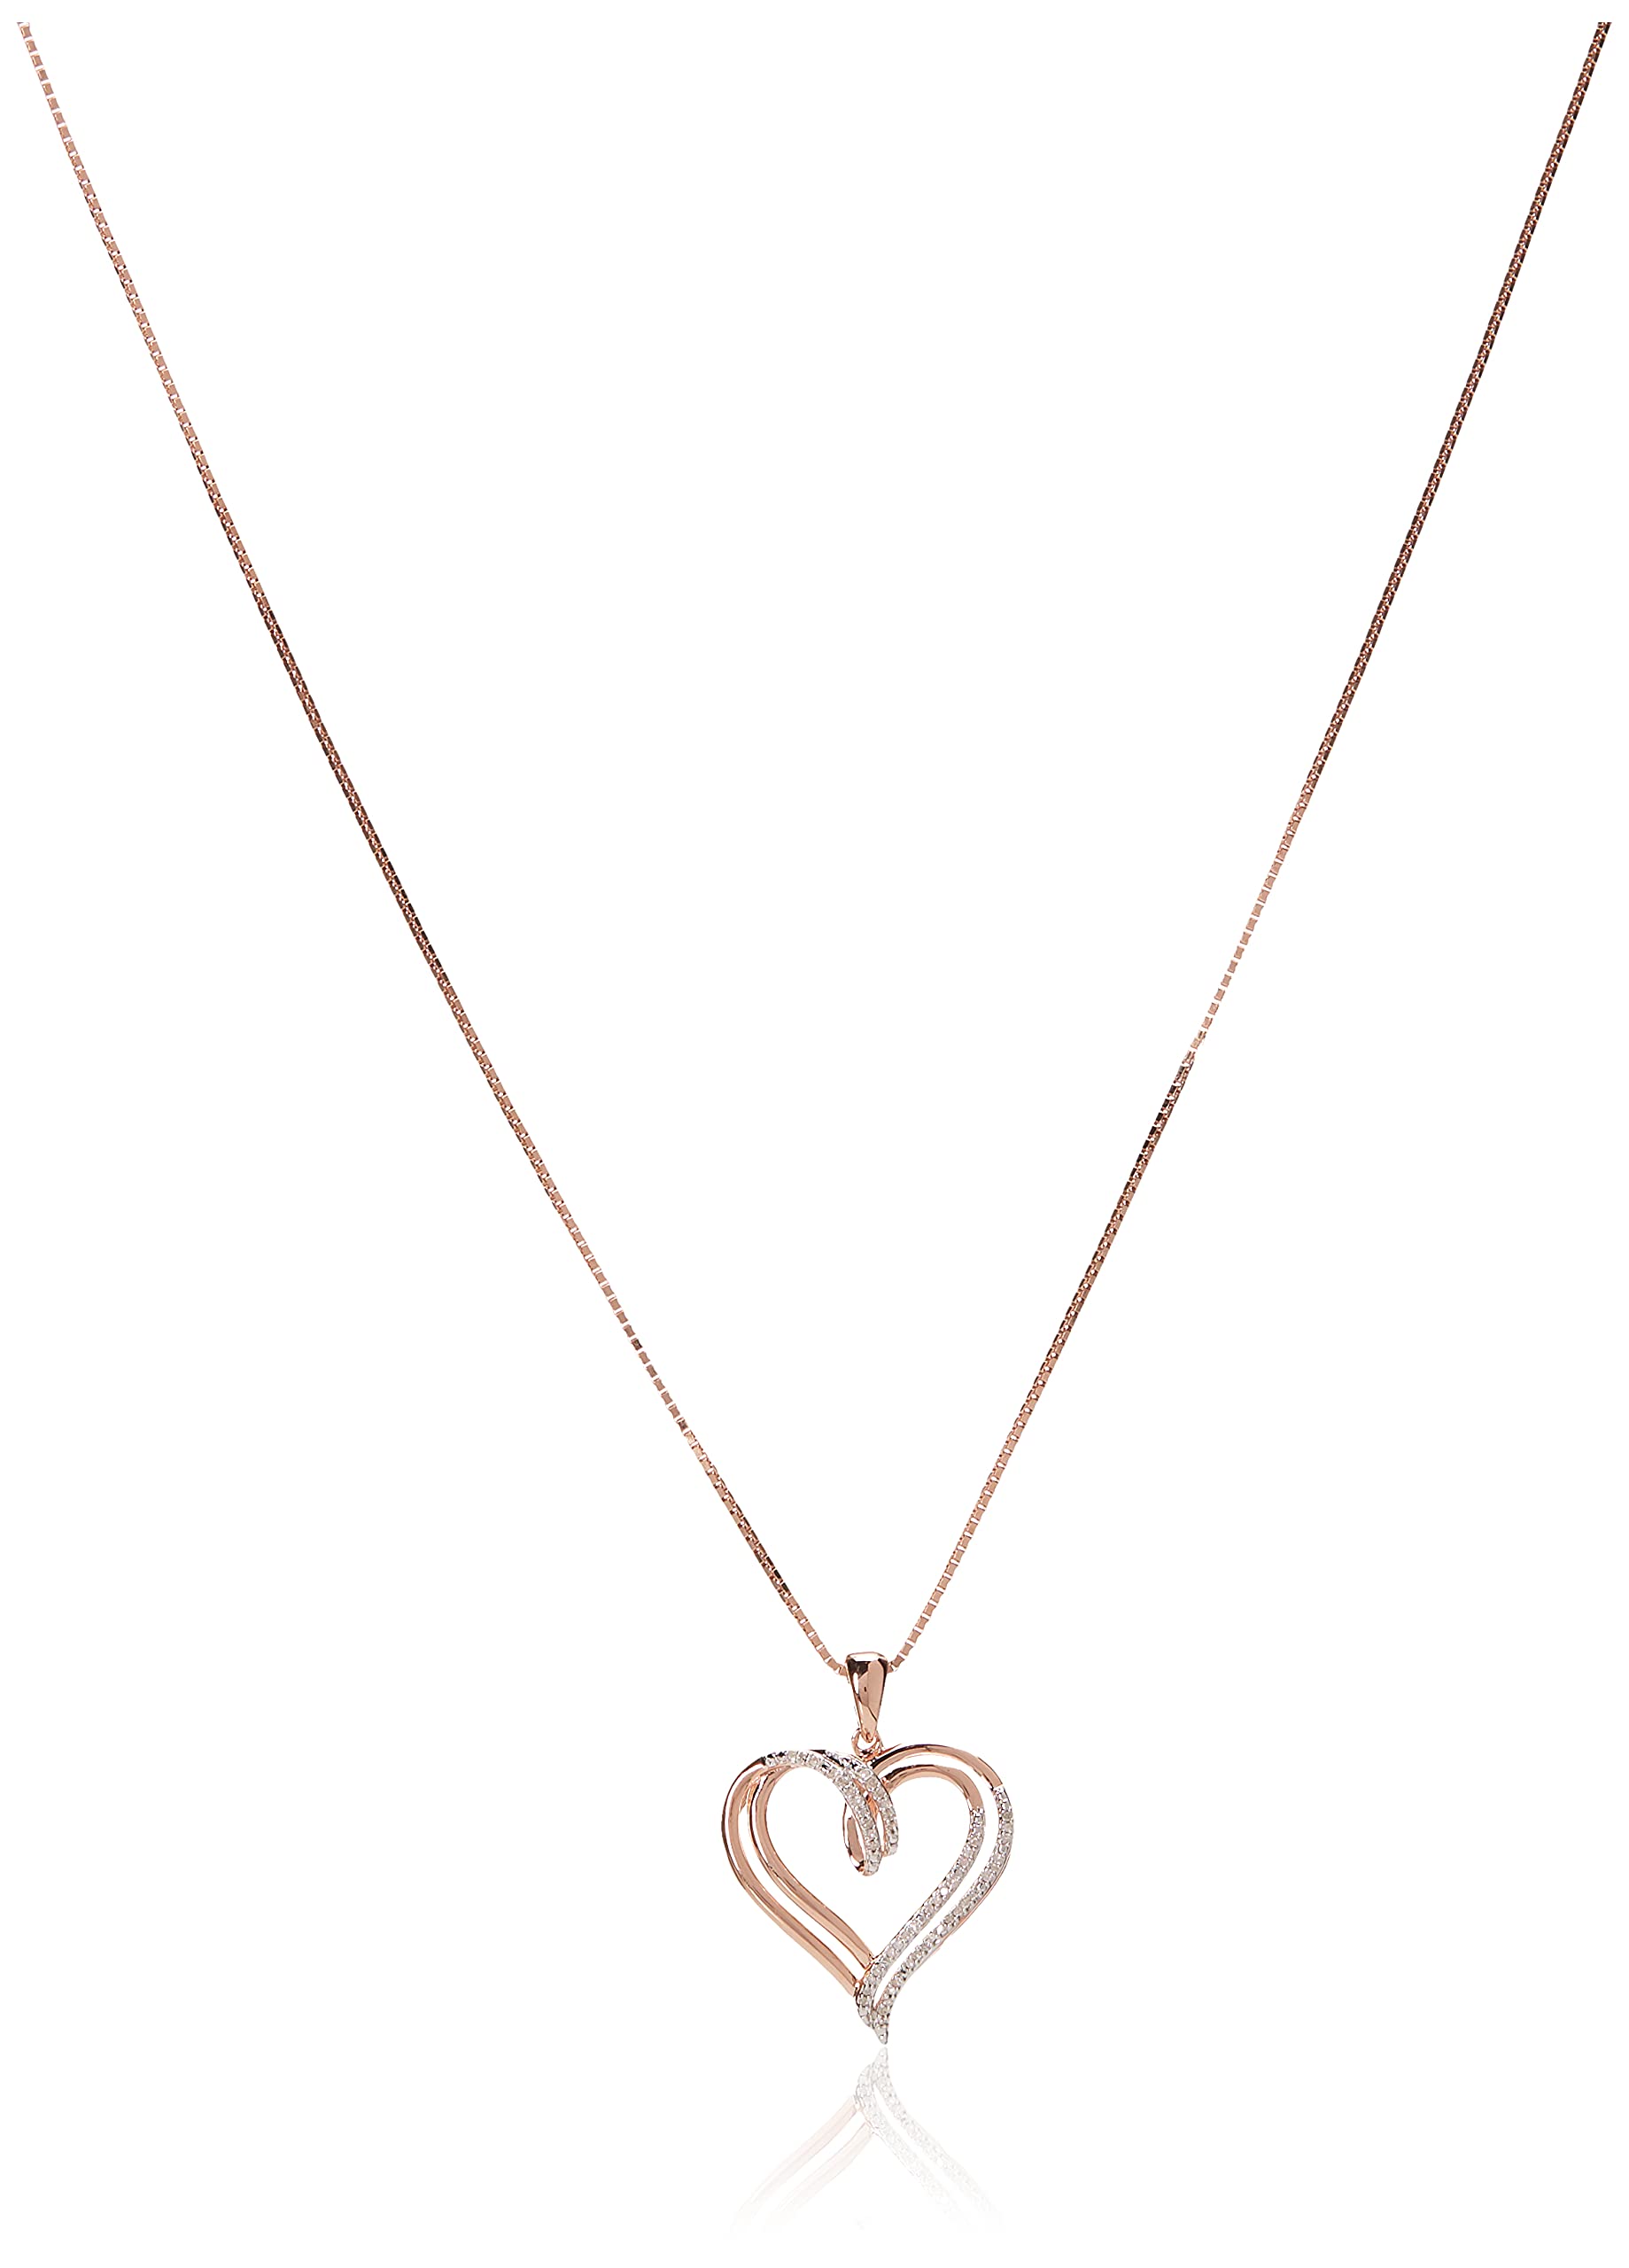 Amazon Collection Sterling Silver Diamond Double Heart Pendant Necklace (1/10 cttw),18